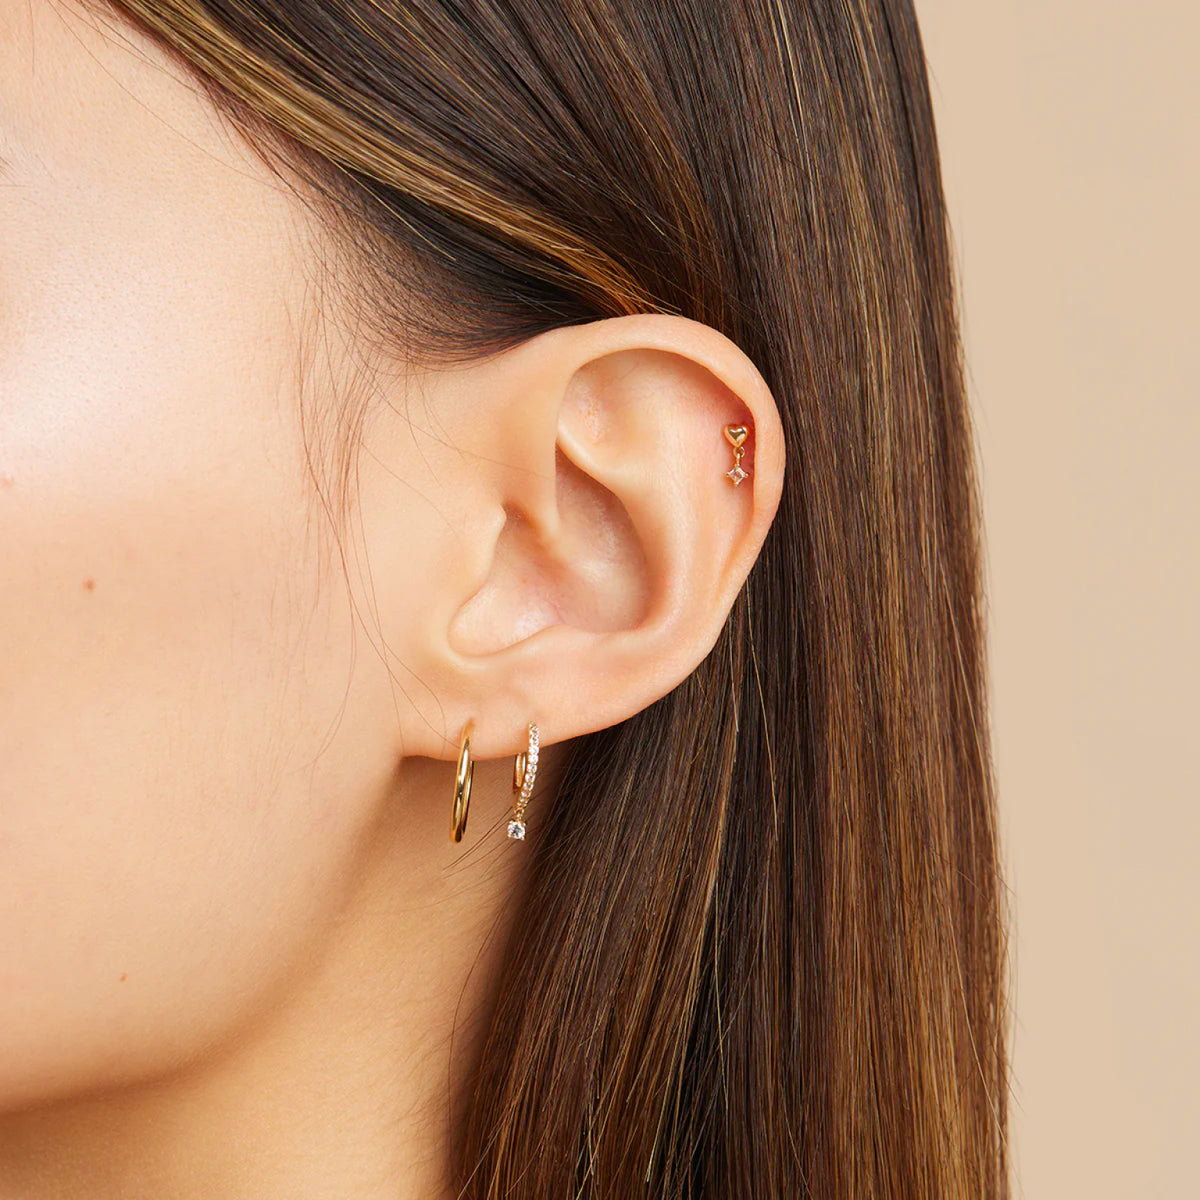 Woman wearing solid gold daith earrings stacked with other solid gold piercing jewellery on her right ear.